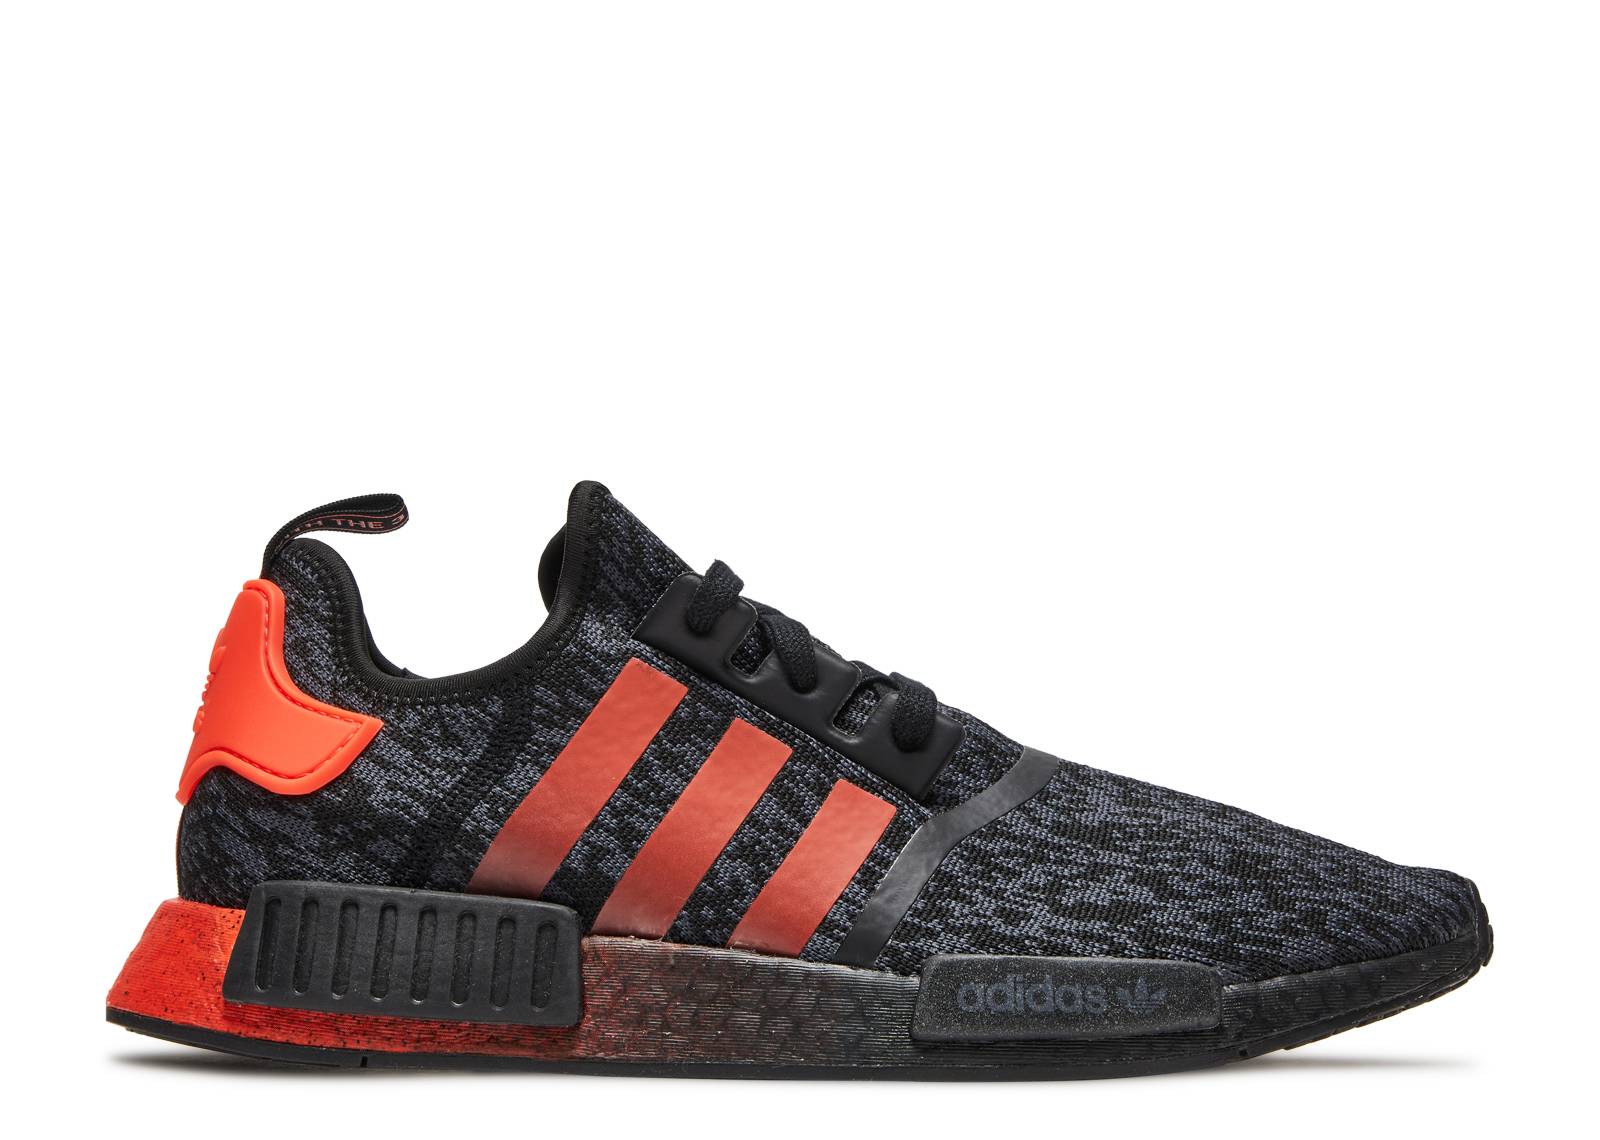 NMD_R1 'Pirate Solar Red'